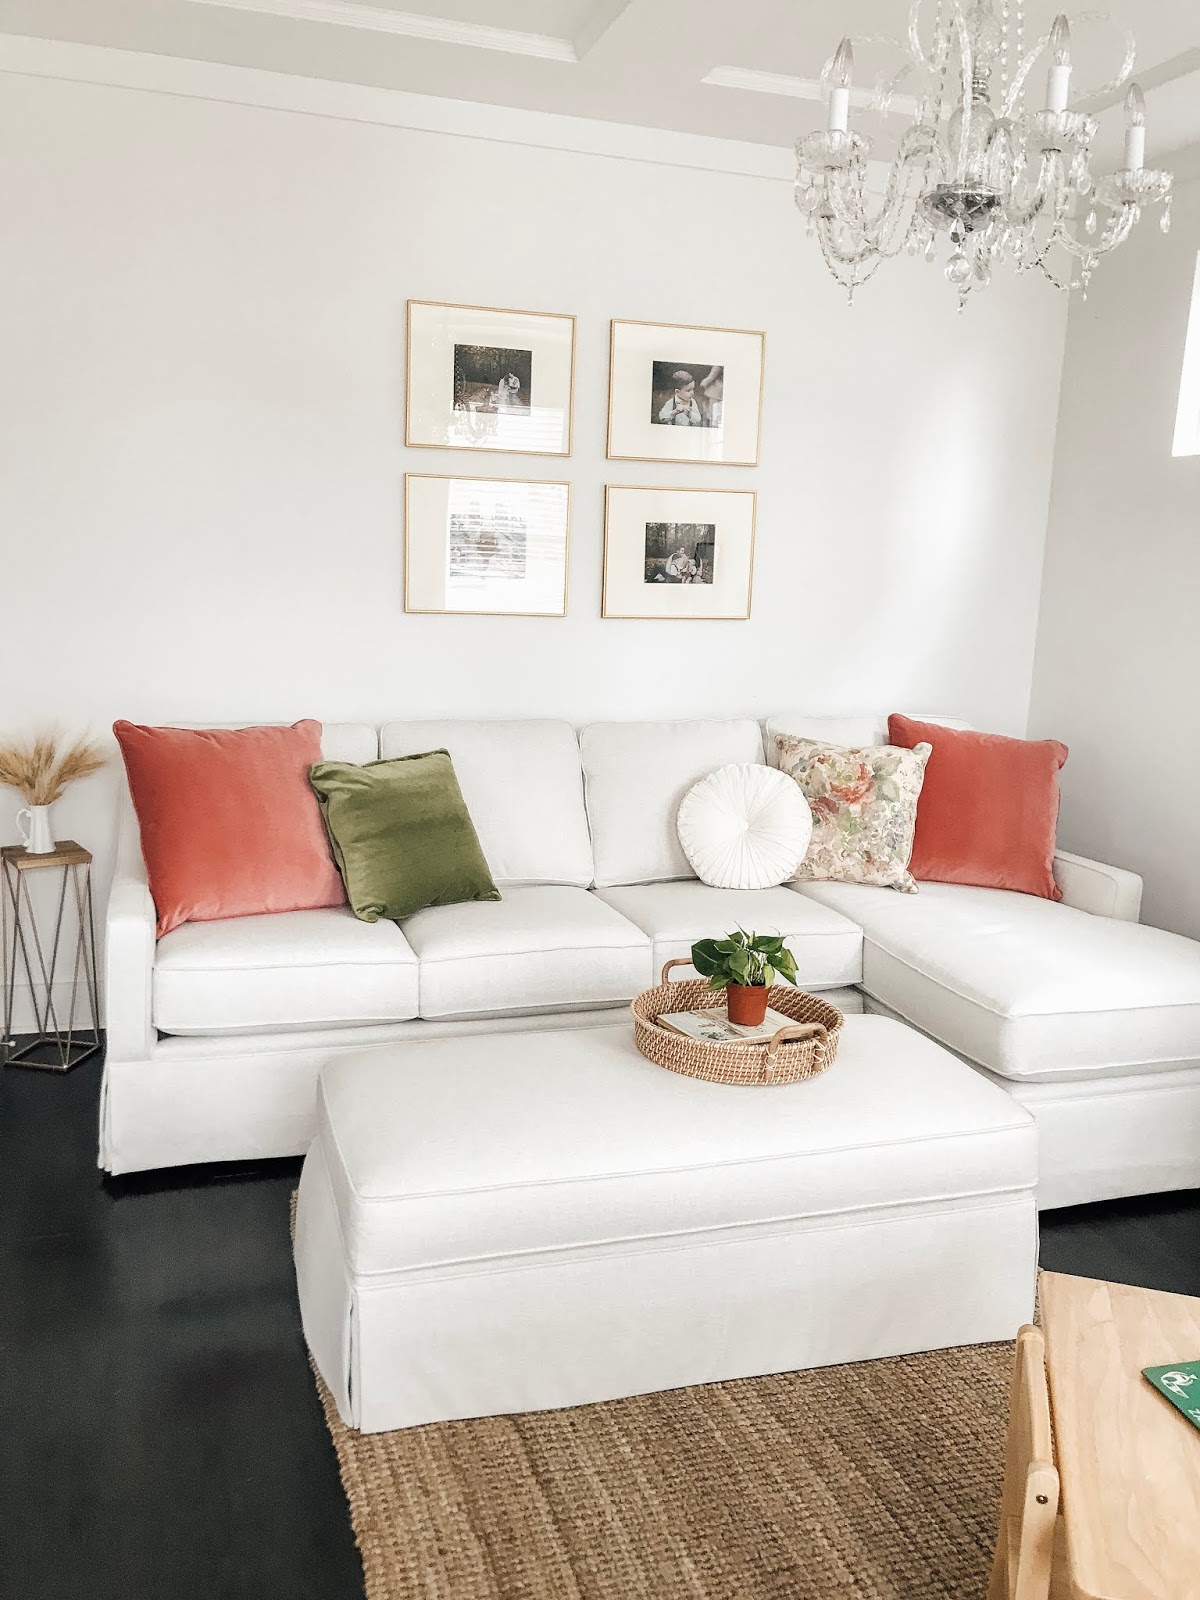 Home Decor Designing A New Family Space With Bassett Furniture